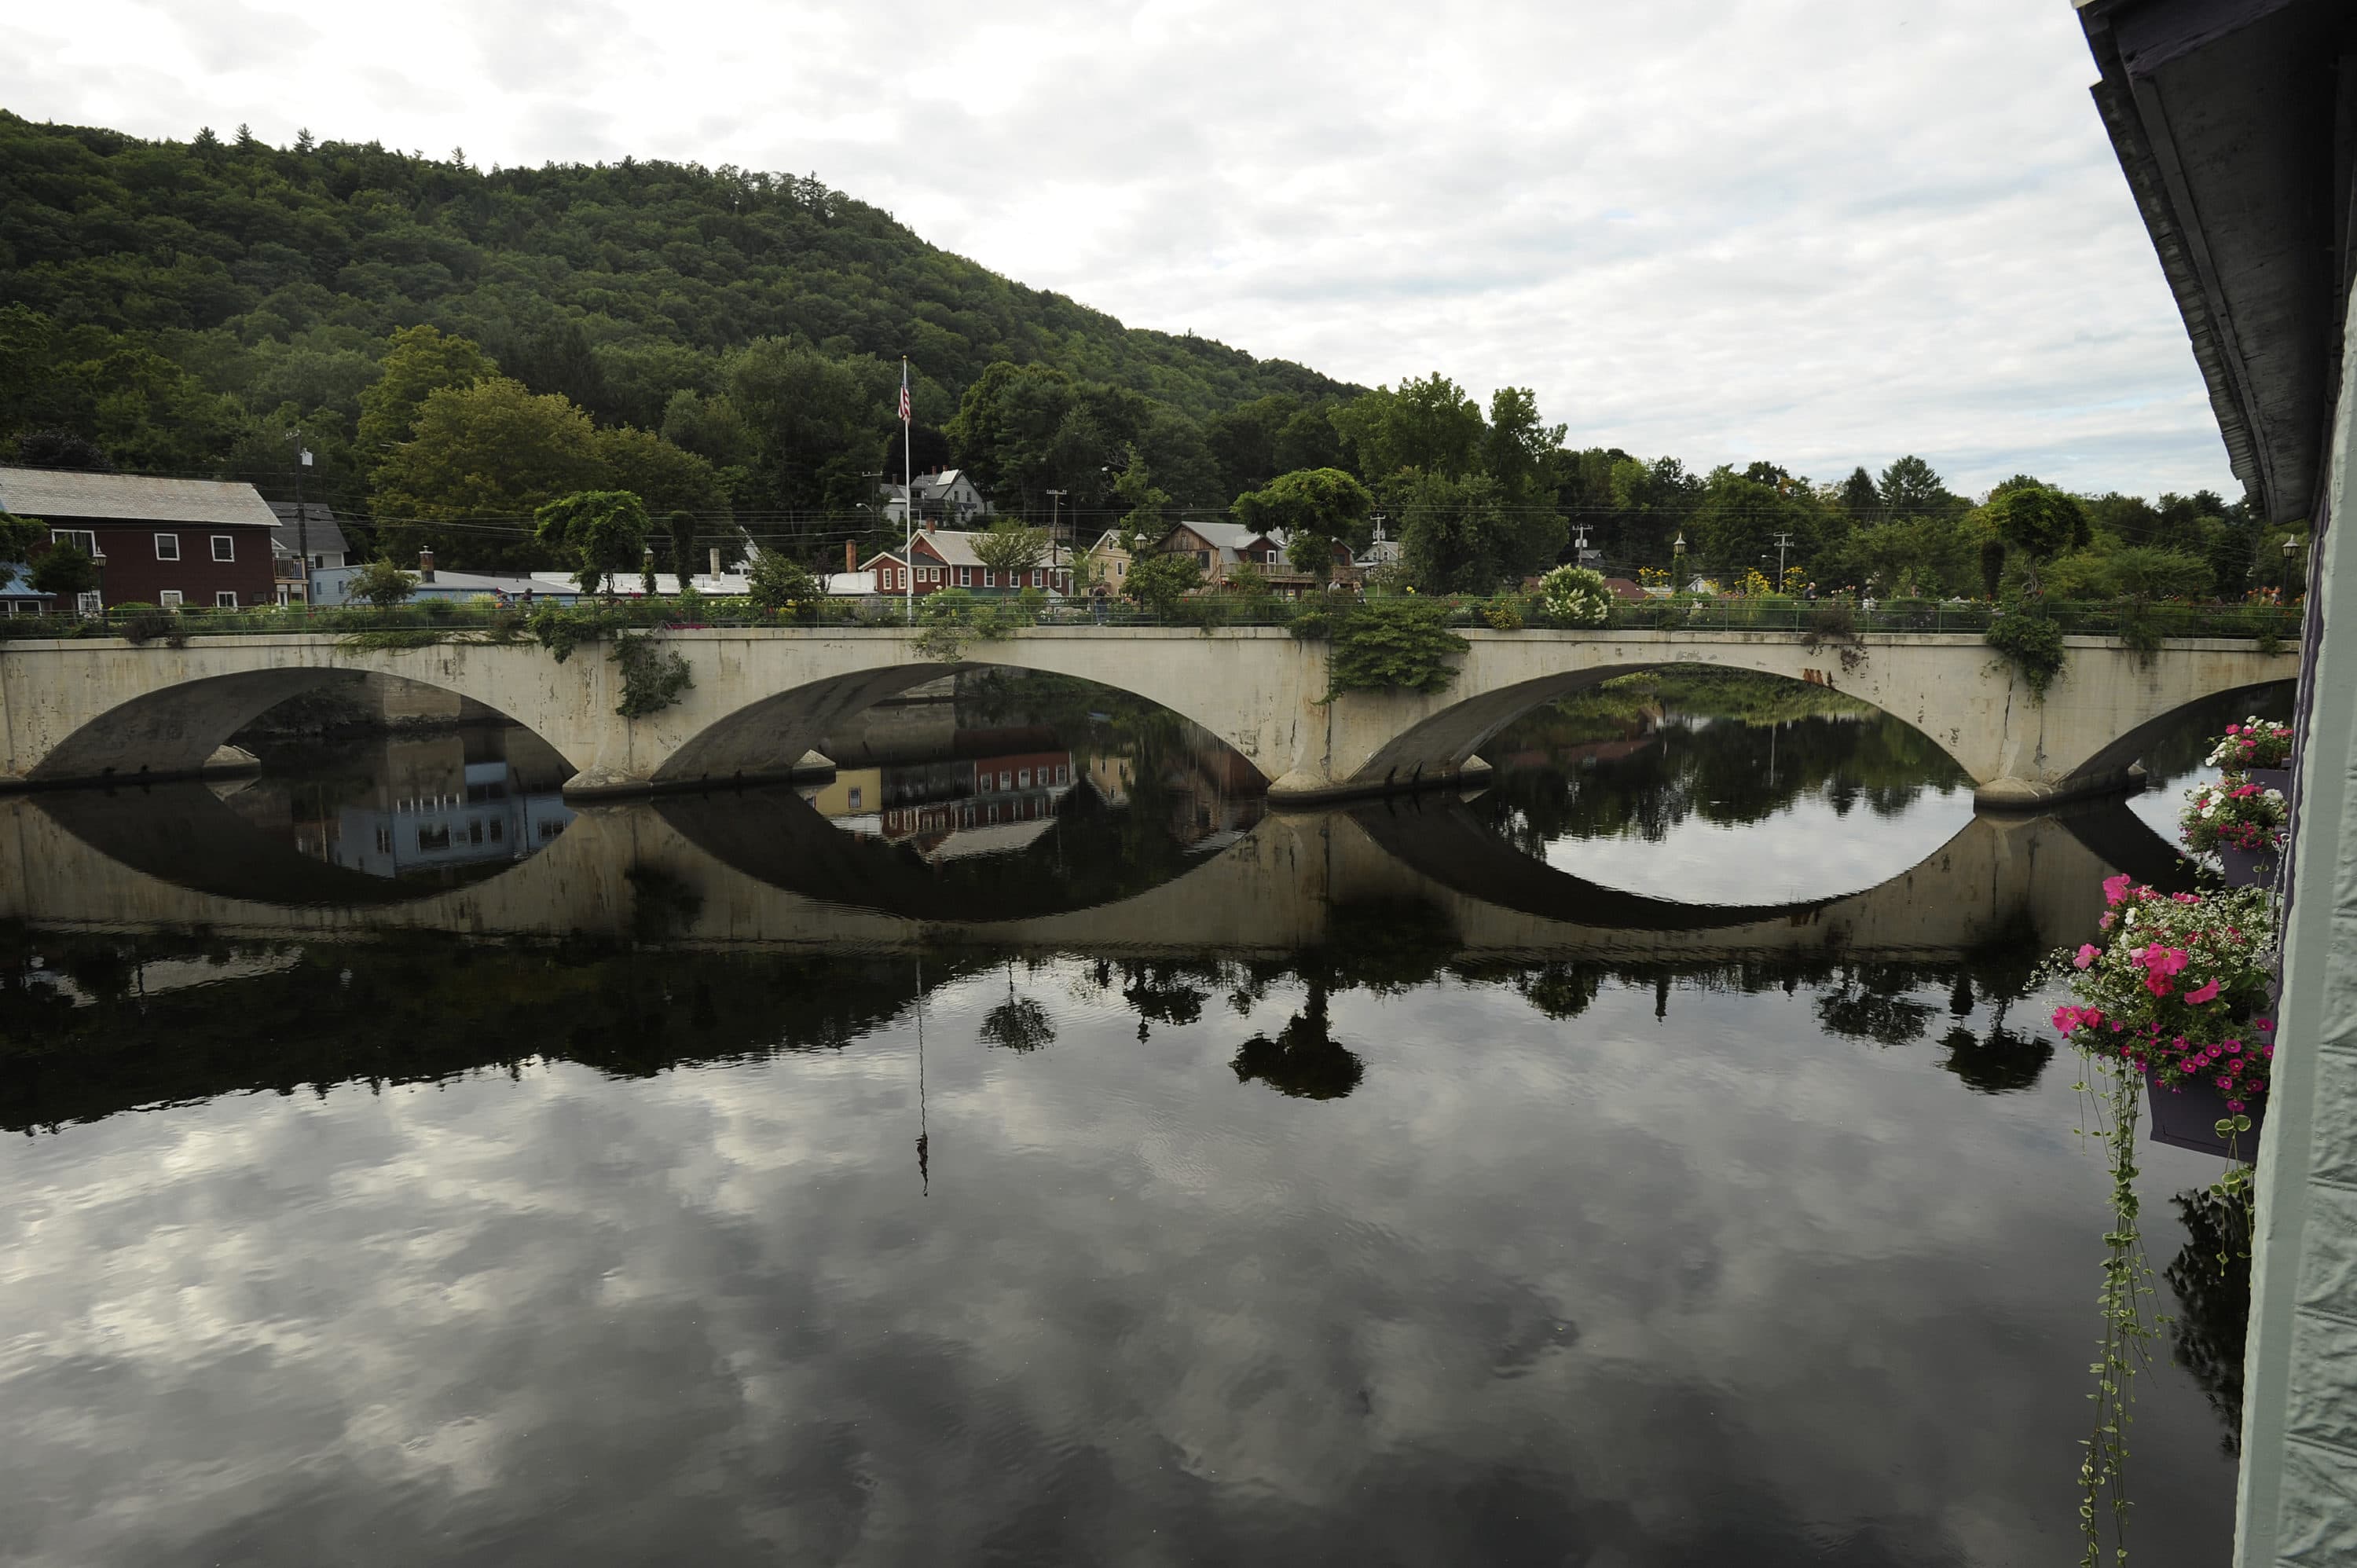 The famous bridge of flowers is the biggest attraction in the town of Shelburne Falls, a village that straddles the towns of Shelburne and Buckland in Western Massachusetts. (Essdras M. Suarez/The Boston Globe via Getty Images)